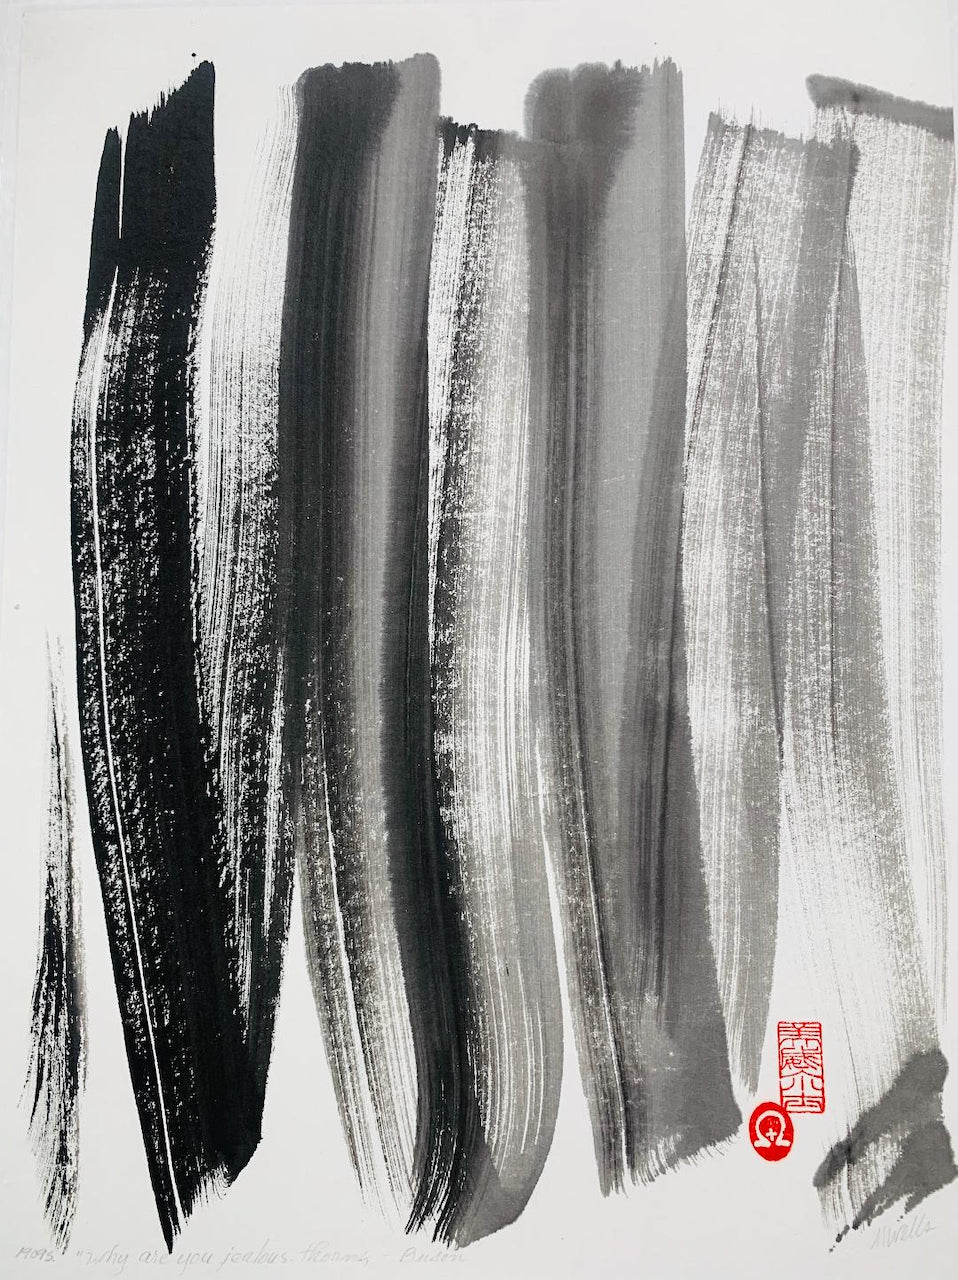 "Why Are You Jealous, Thorns?" by Marilyn Wells, abstract sumi e print, based on Buson poem.